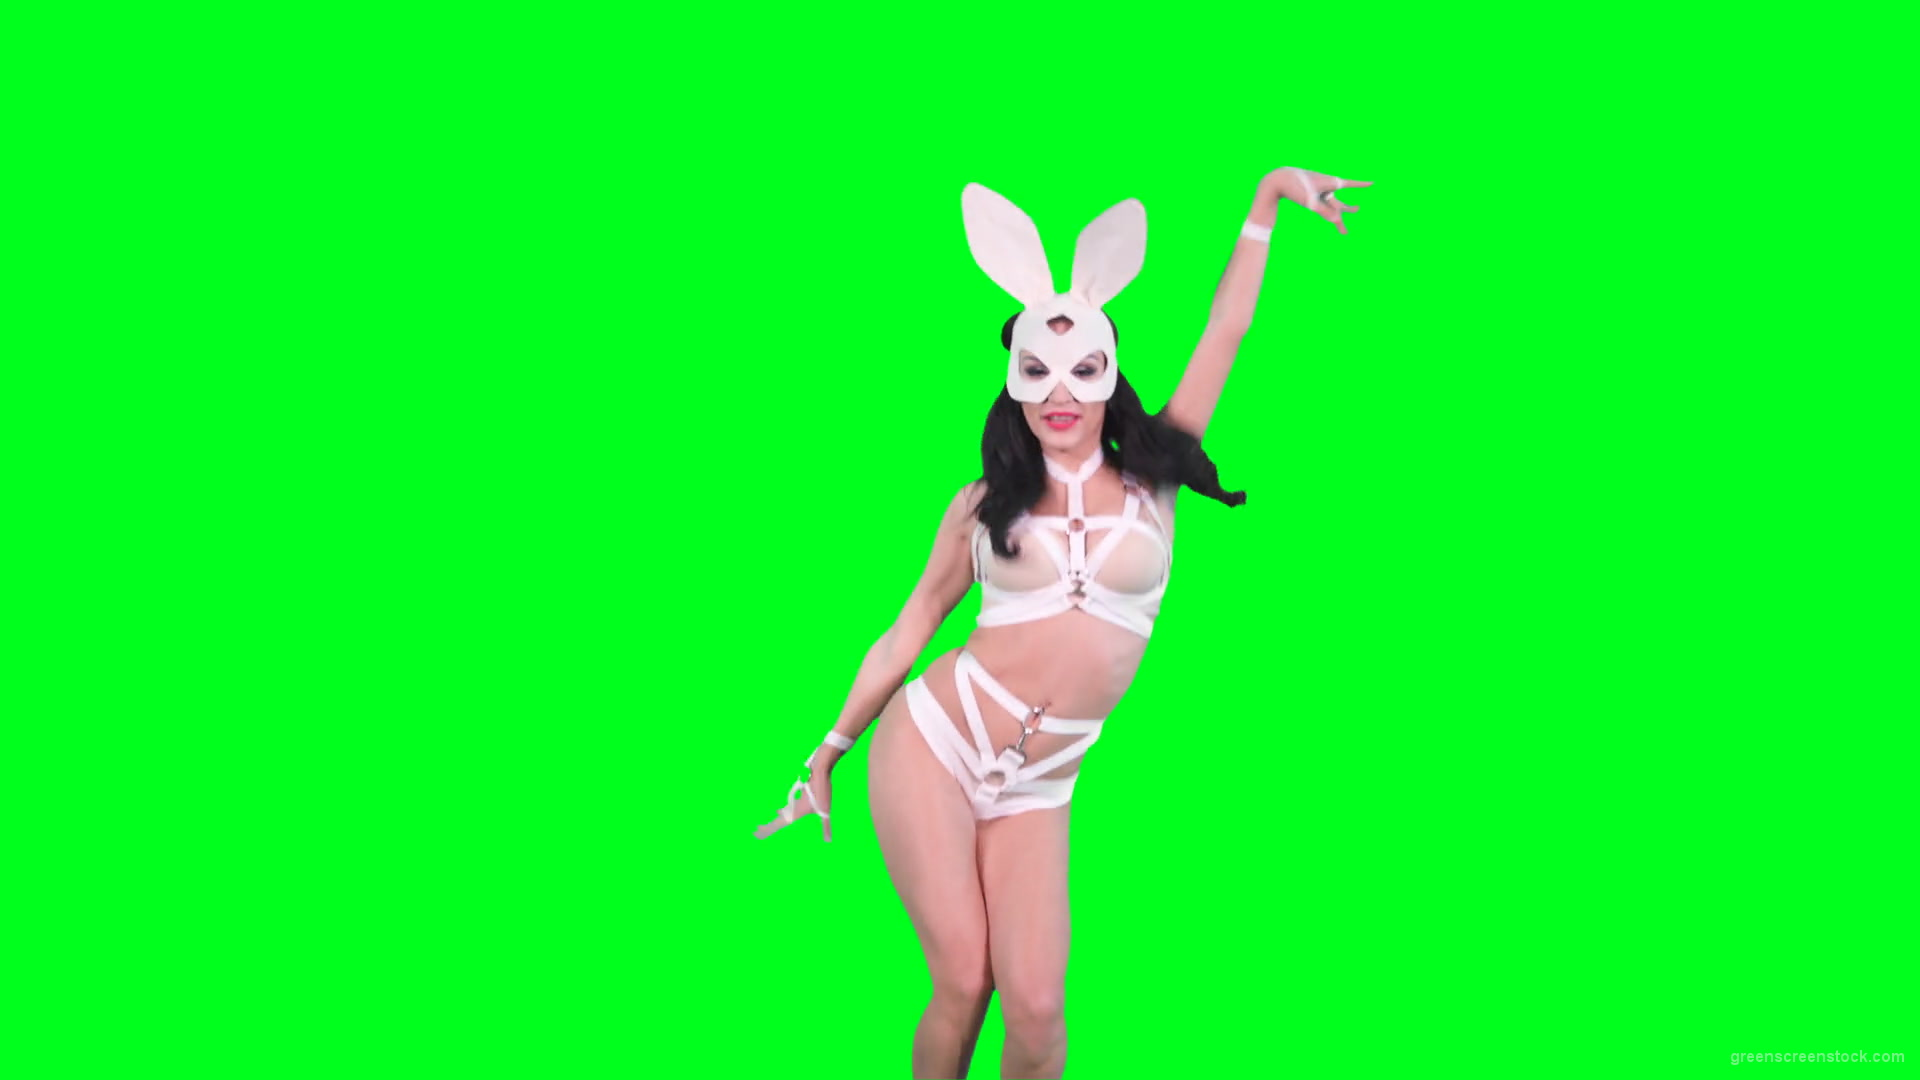 Go-go-Dancer-in-White-Rabbit-EDM-fetish-costume-making-sexy-moves-on-green-screen-4K-video-footage-1920_006 Green Screen Stock